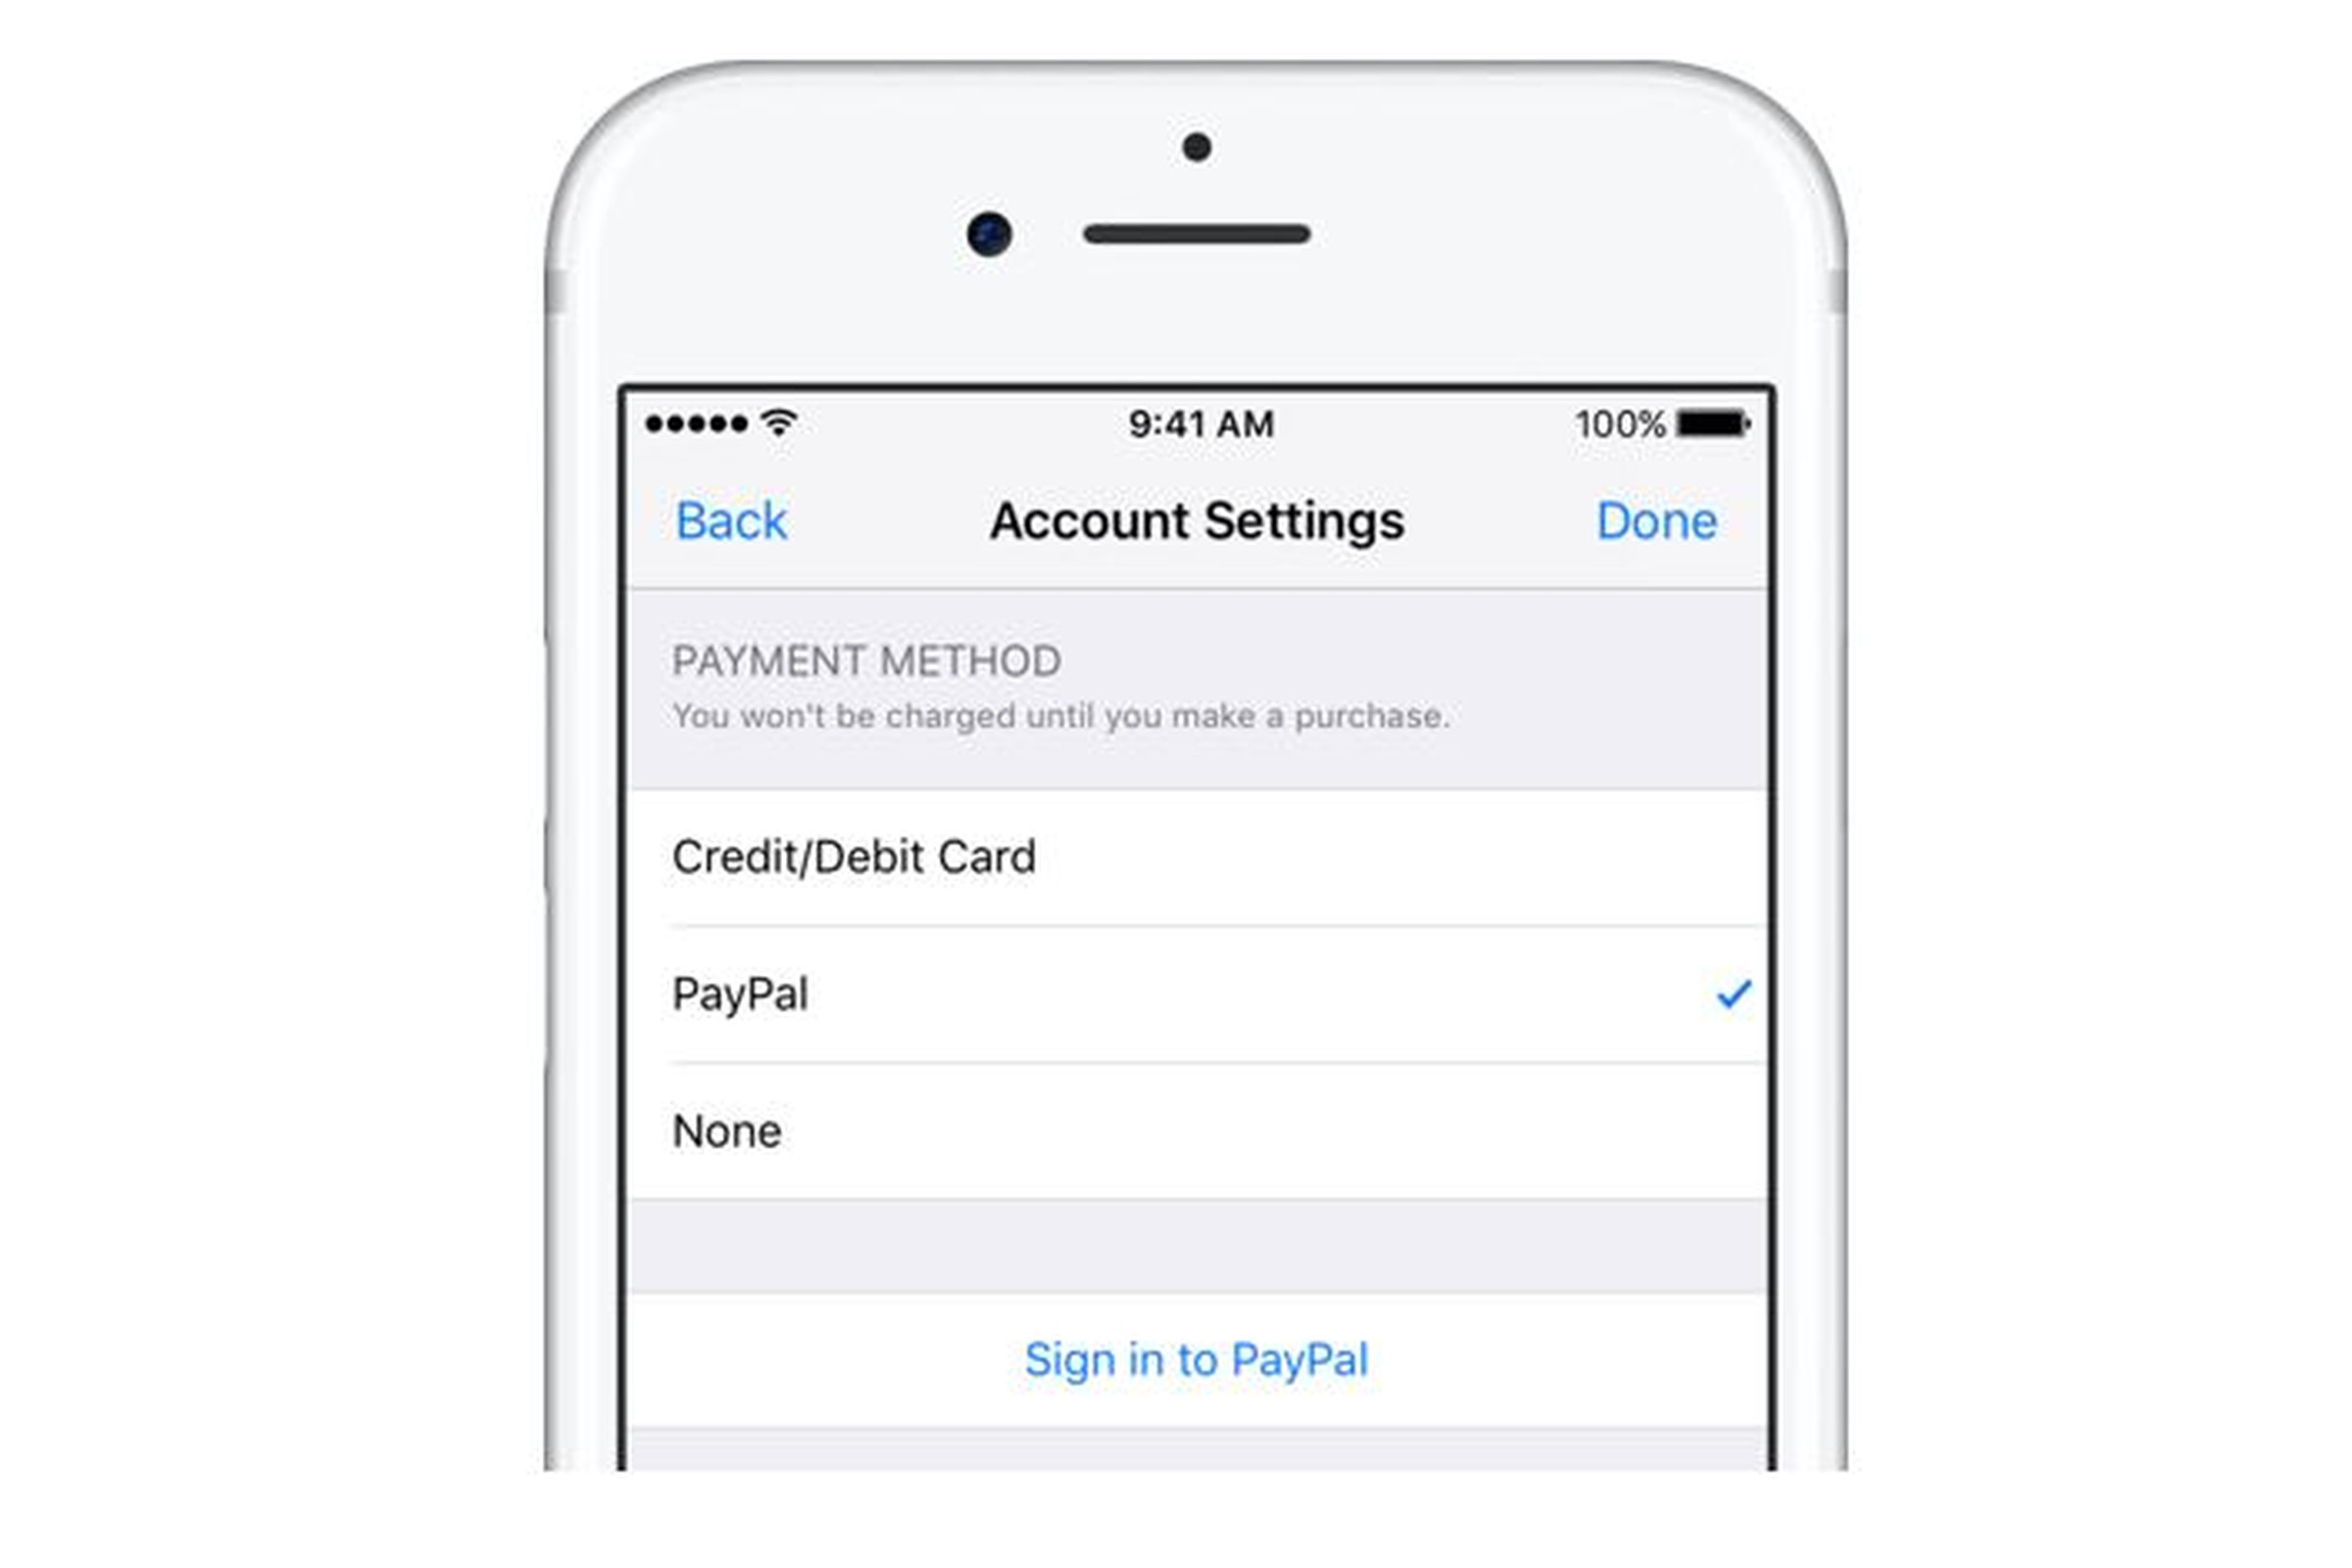 Paypal is now an option for Apple users